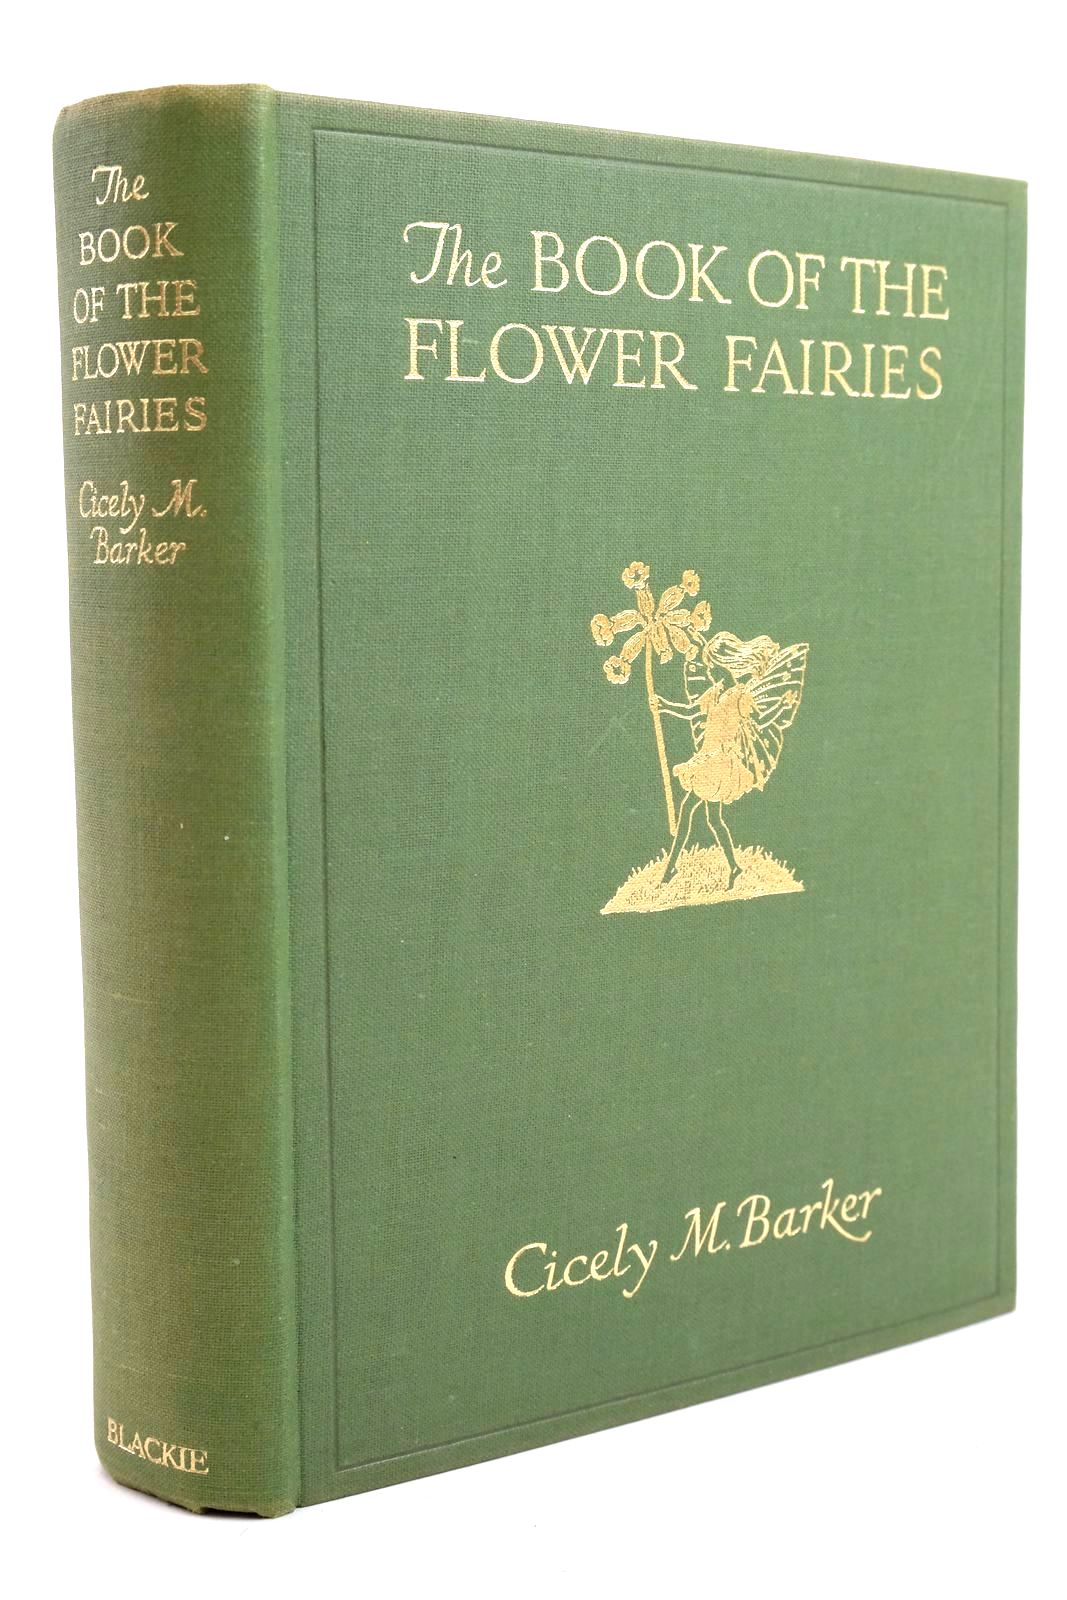 Photo of THE BOOK OF THE FLOWER FAIRIES written by Barker, Cicely Mary illustrated by Barker, Cicely Mary published by Blackie & Son Ltd. (STOCK CODE: 1320820)  for sale by Stella & Rose's Books